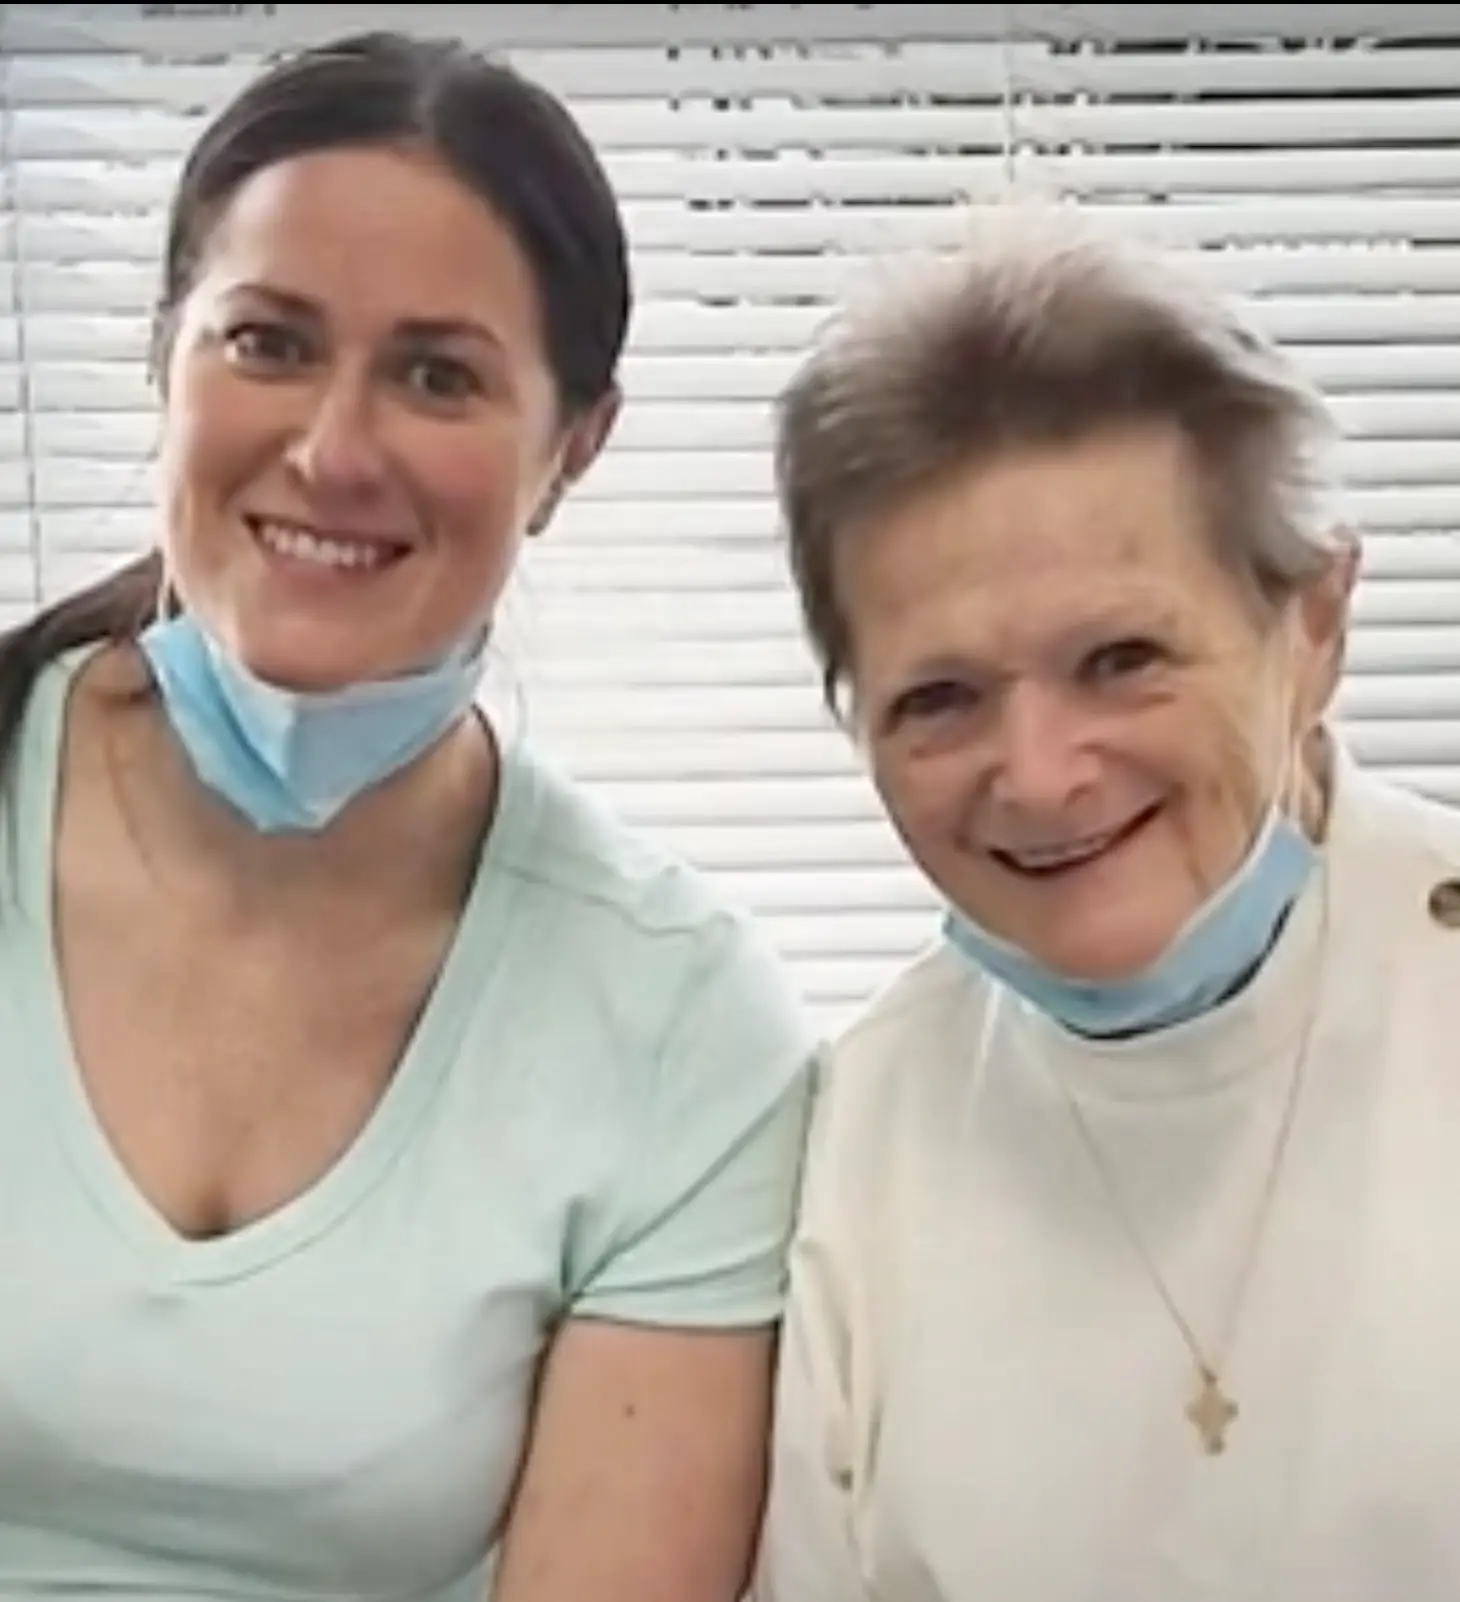 Eileen and Julia Harlin im University of Maryland Medical Center in Baltimore | Quelle: YouTube/WBALTV11